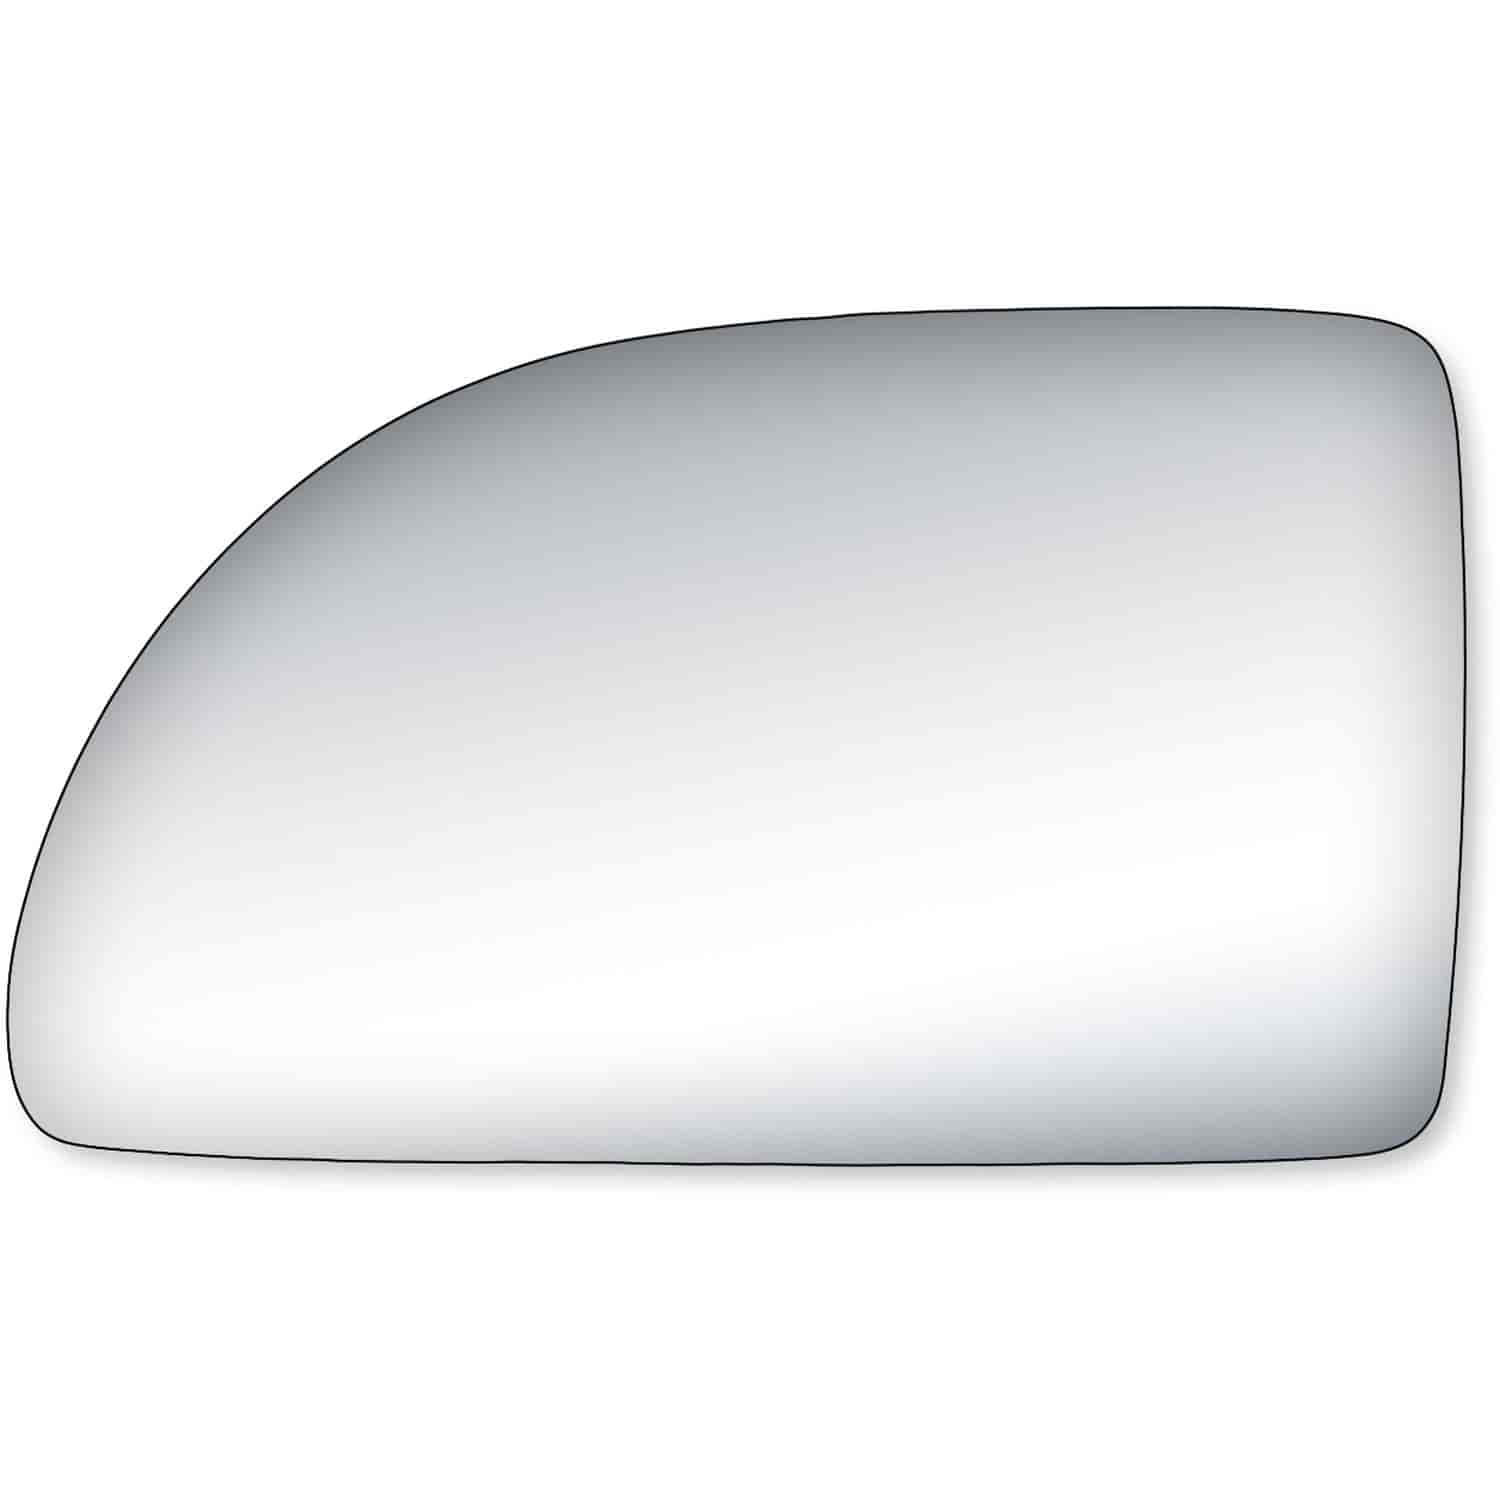 Replacement Glass for 05-09 Equinox; 05-09 Torrent; 02-07 Vue; 07 Vue Hybrid the glass measures 4 9/